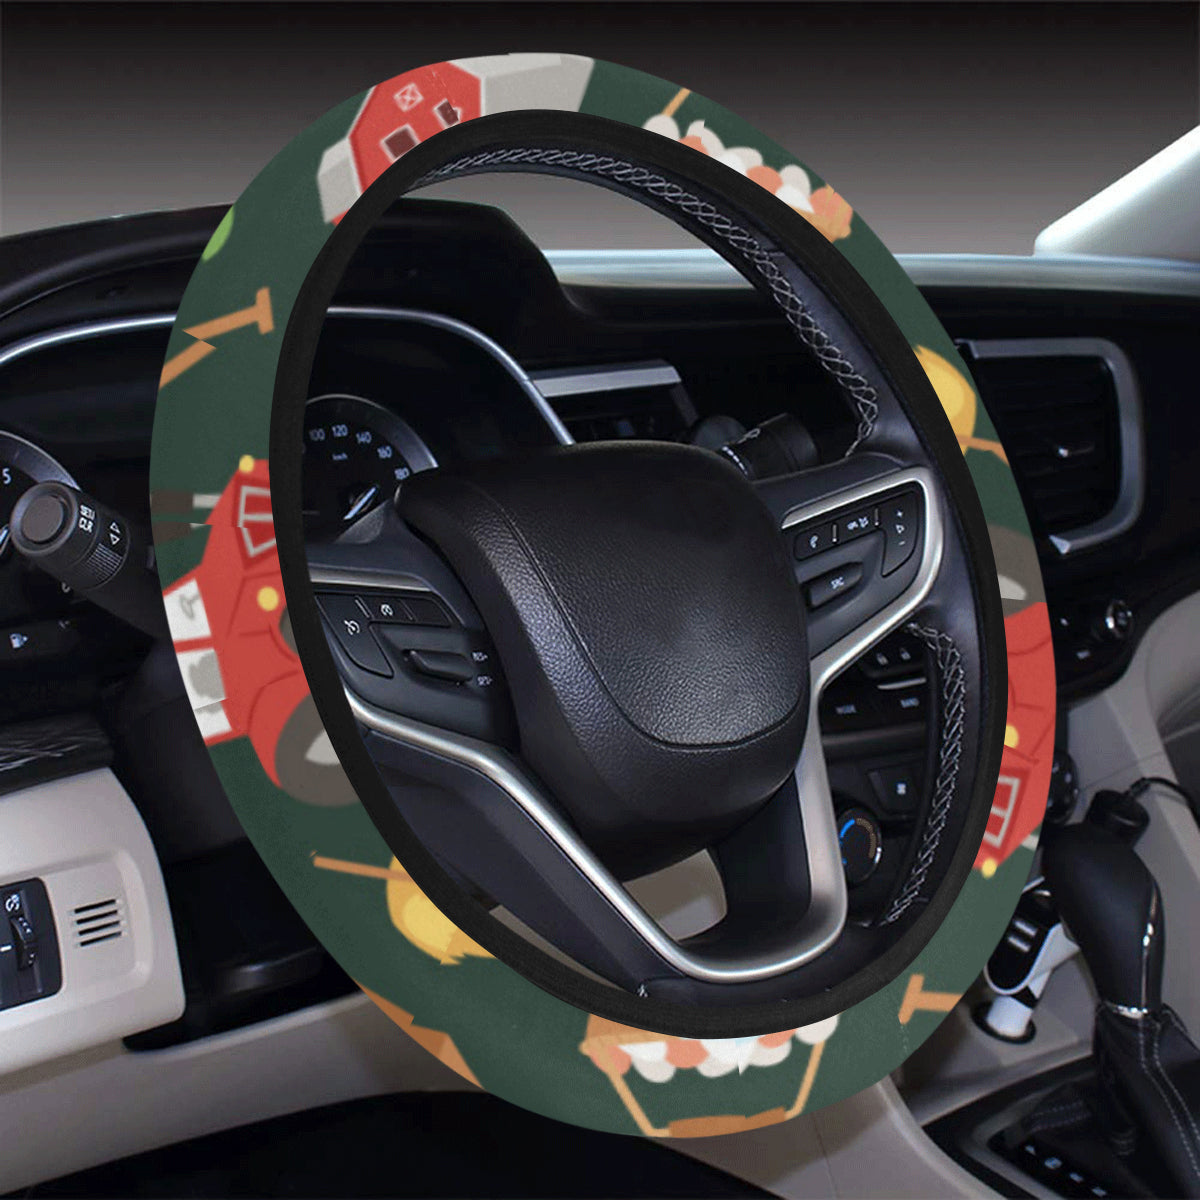 Agricultural Farm Print Design 02 Steering Wheel Cover with Elastic Edge